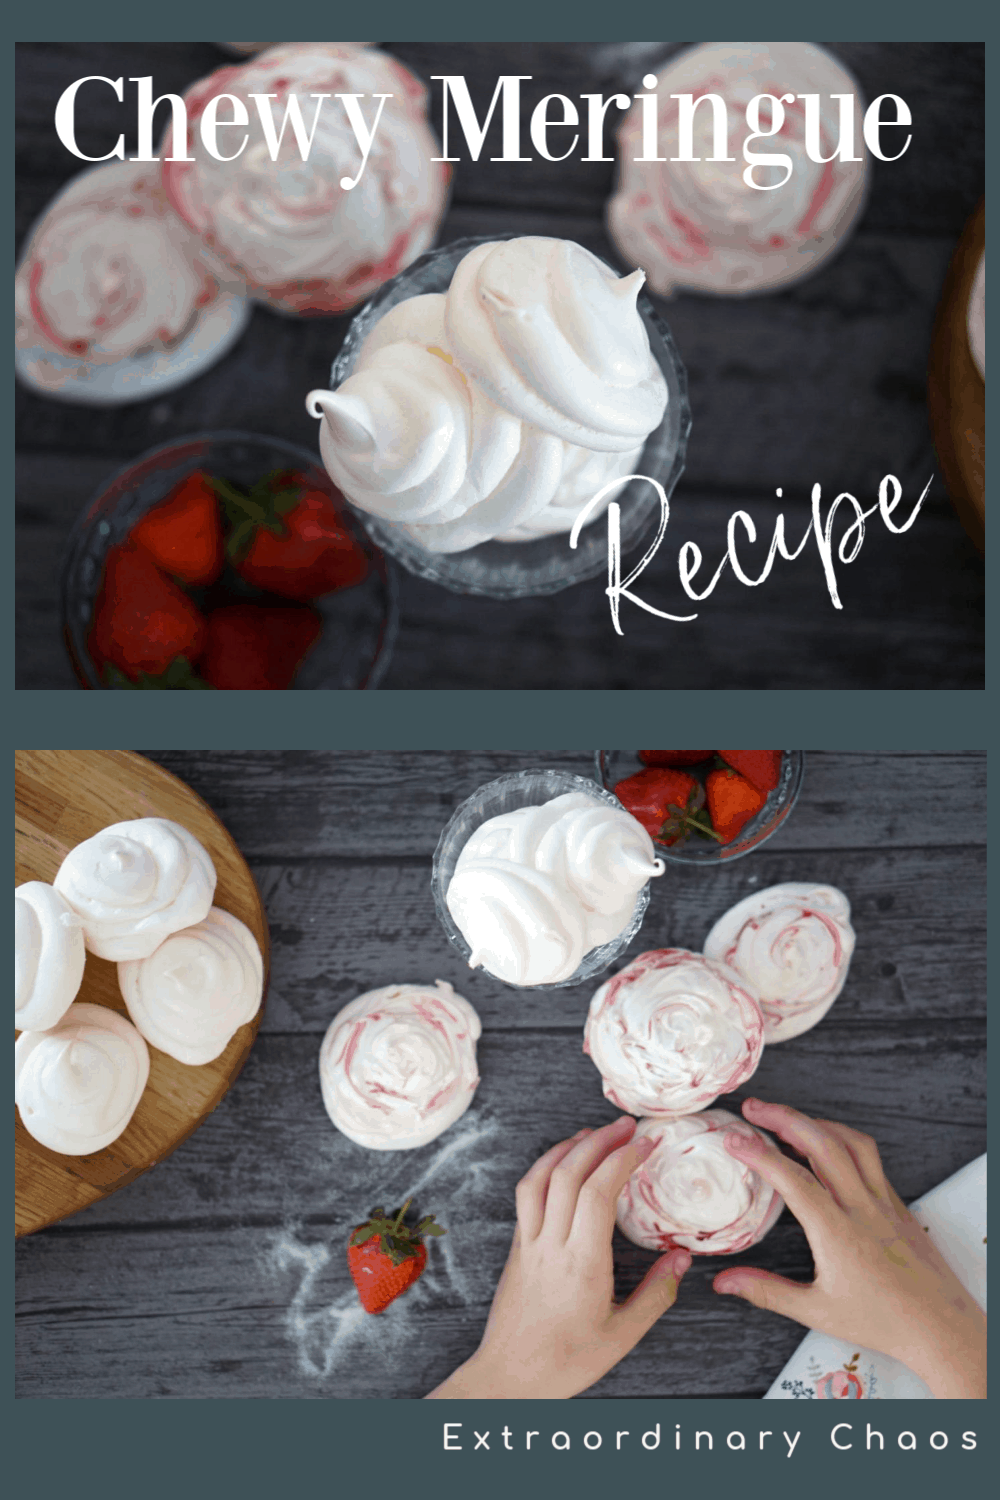 Easy Chewy Meringue recipe with pink swirls